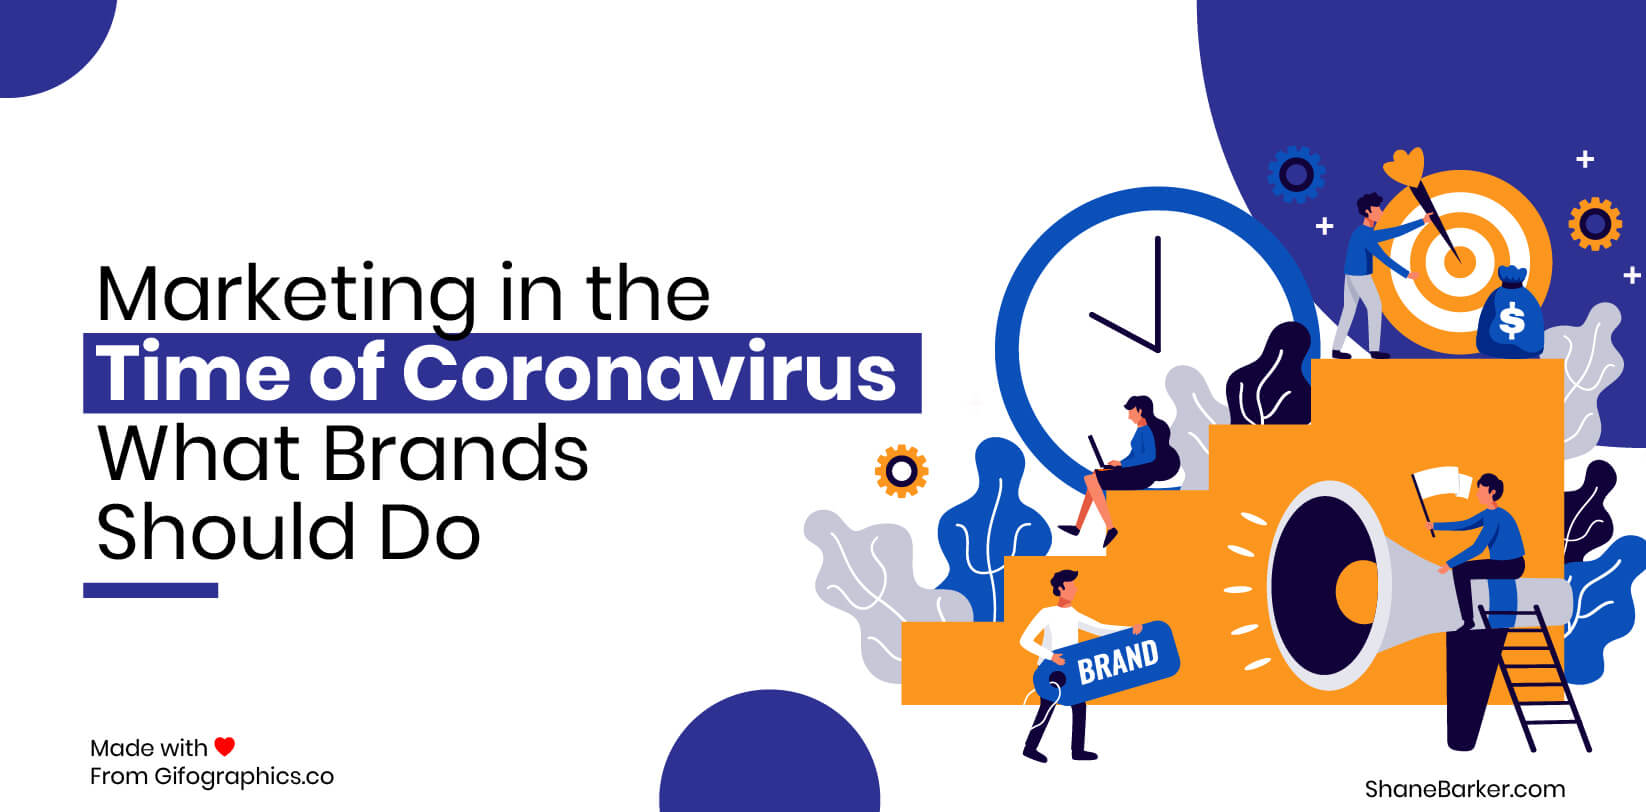 Marketing in the Time of Coronavirus – What Brands Should Do